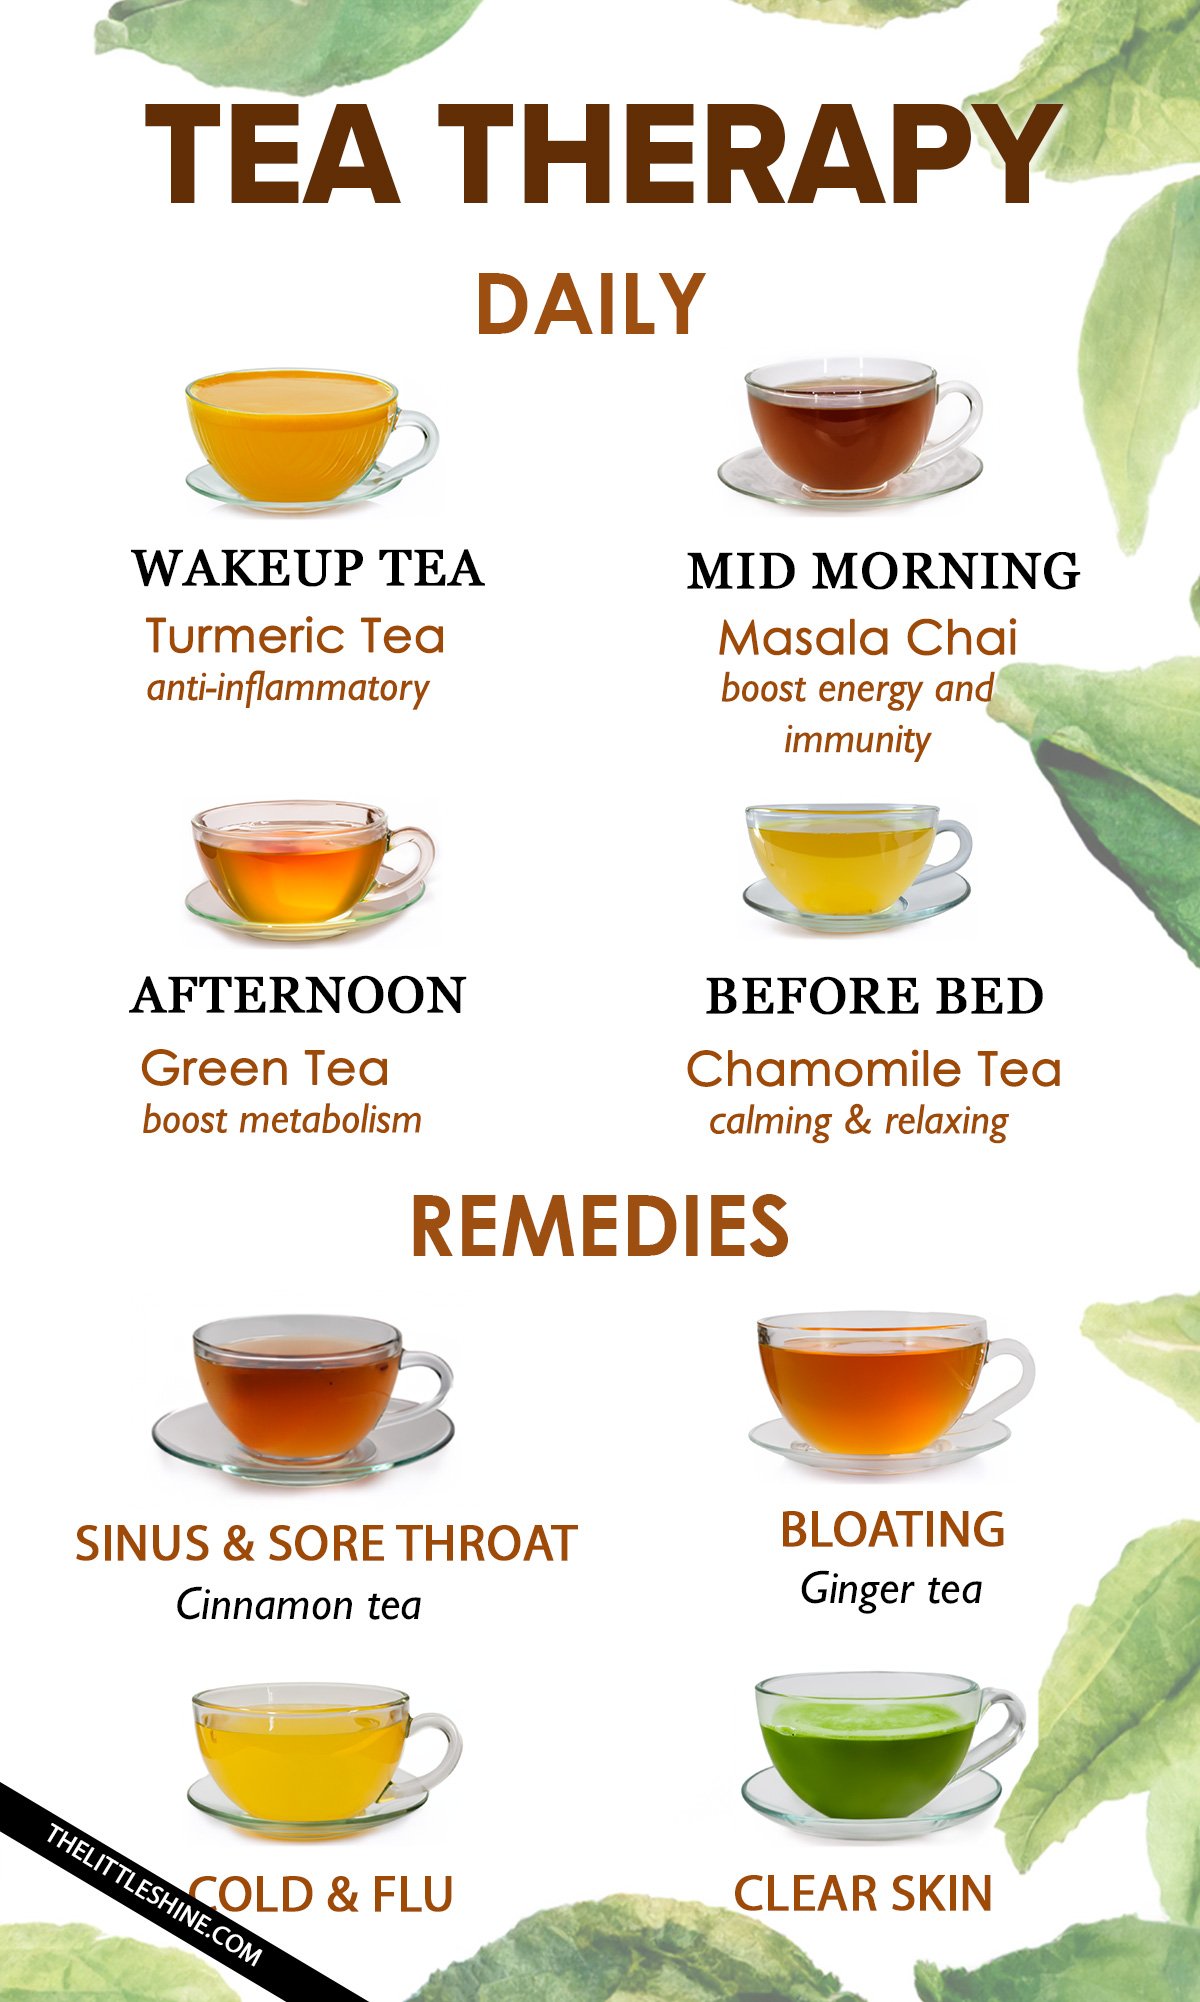 TEA THERAPY -  learn to unlock the health benefits of tea